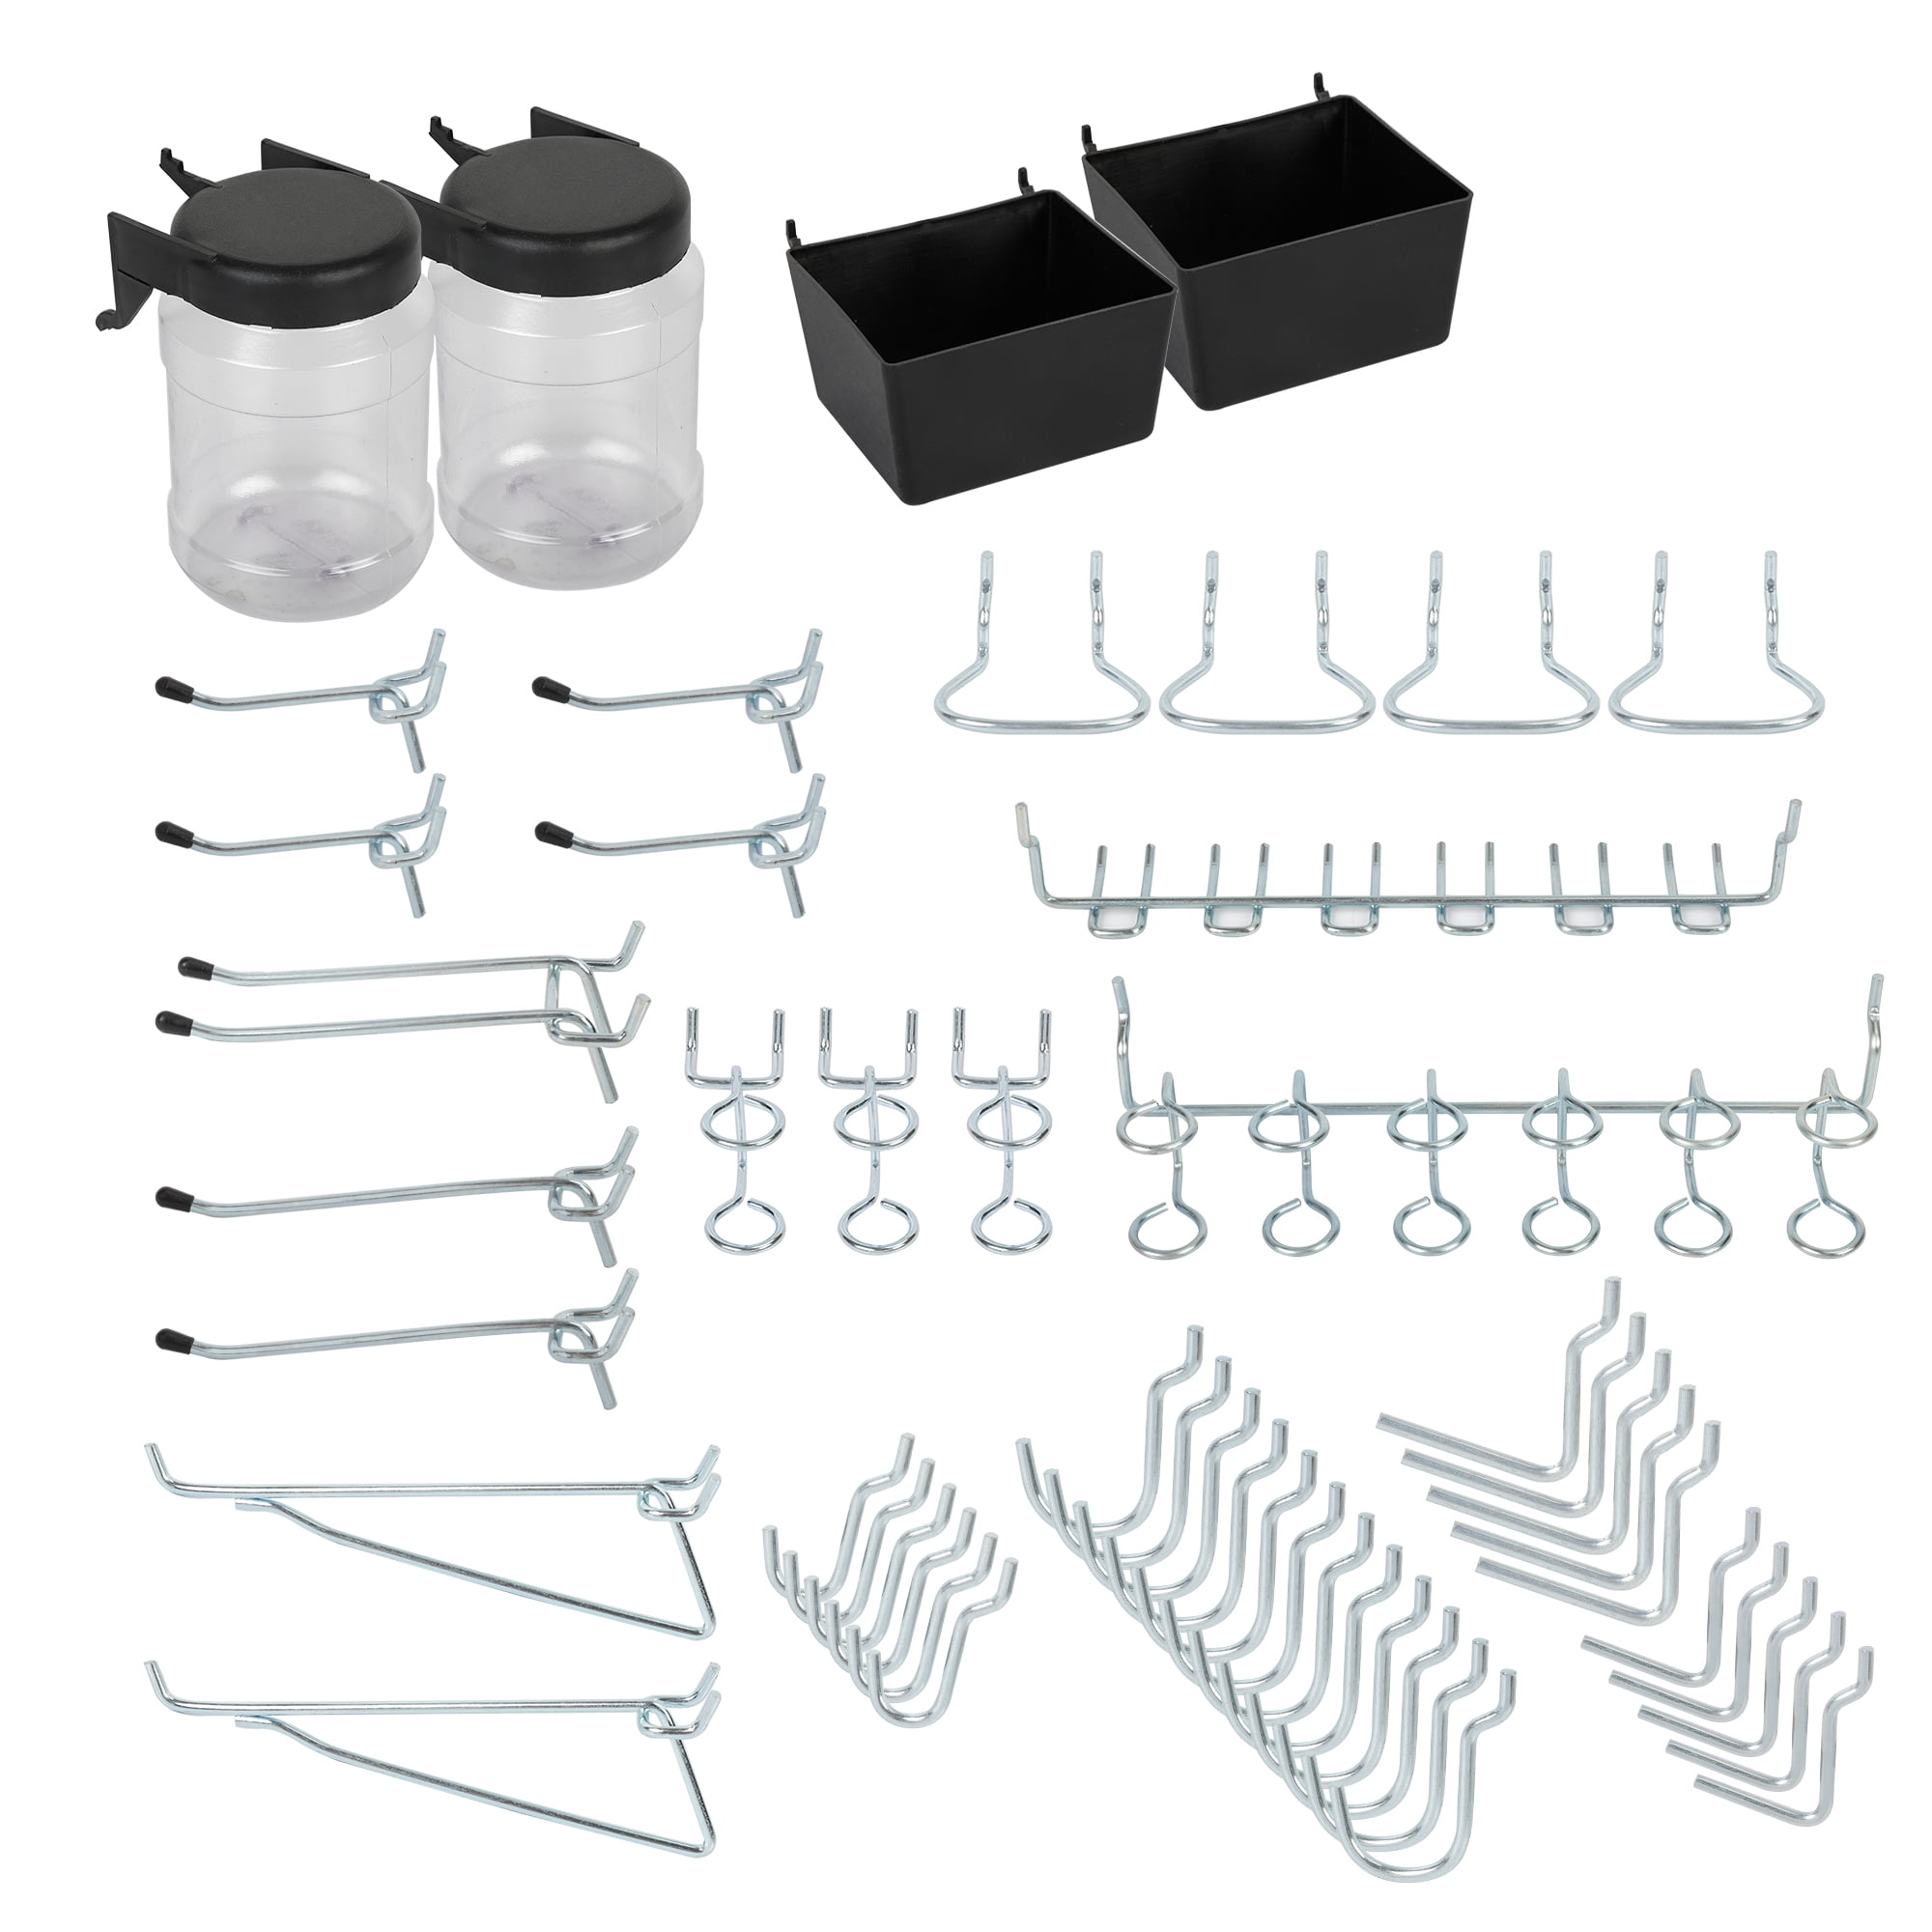 50-Piece Hyper Tough Pegboard Hook Kit for 1/8" & 1/4" Pegboard Holes $6.72 + Free S&H w/ Walmart+ or $35+